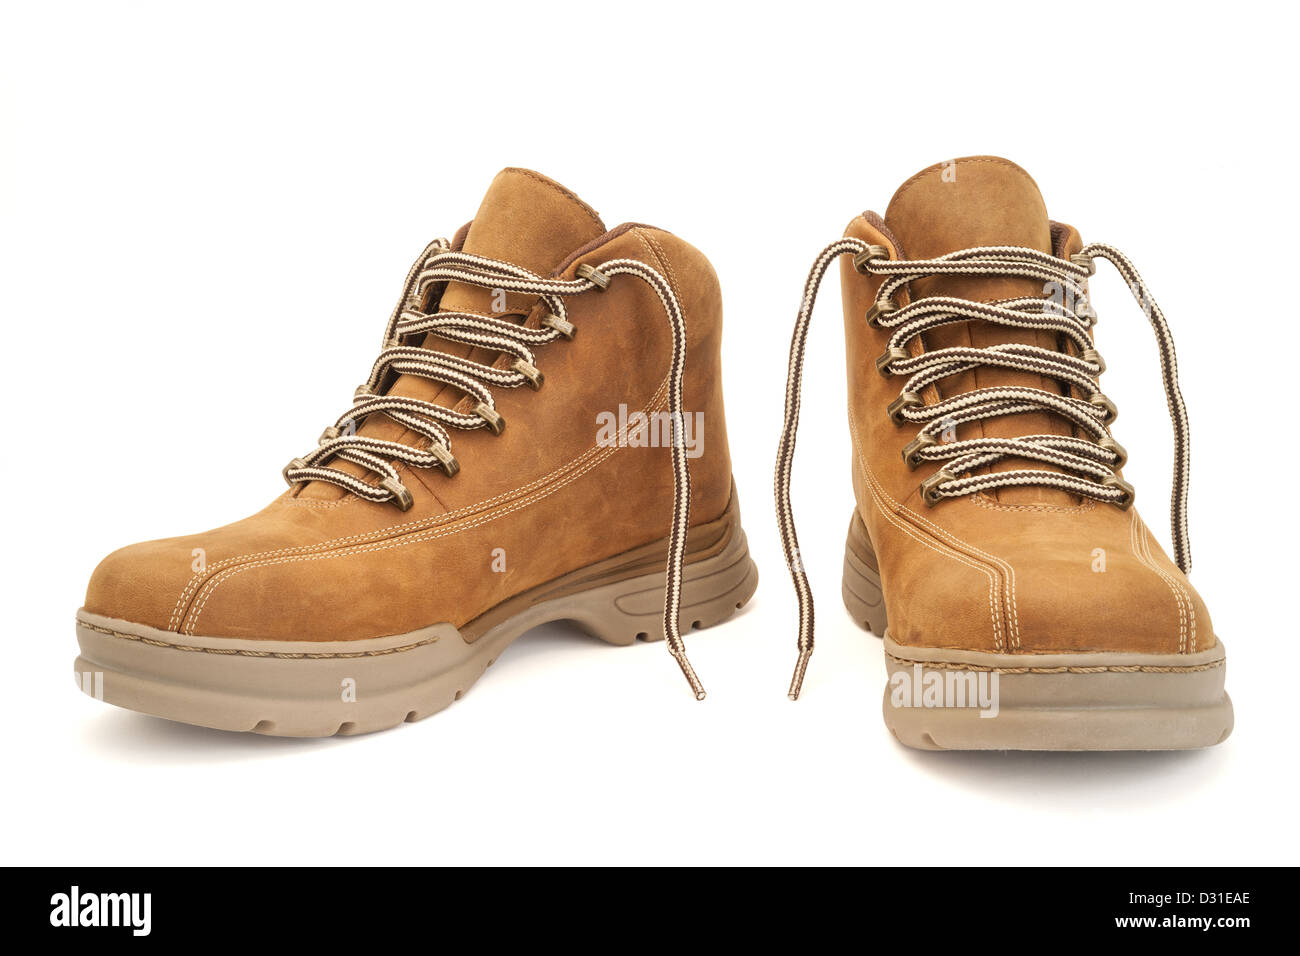 Chaussures de randonnée marron isolated on white with clipping path Banque D'Images